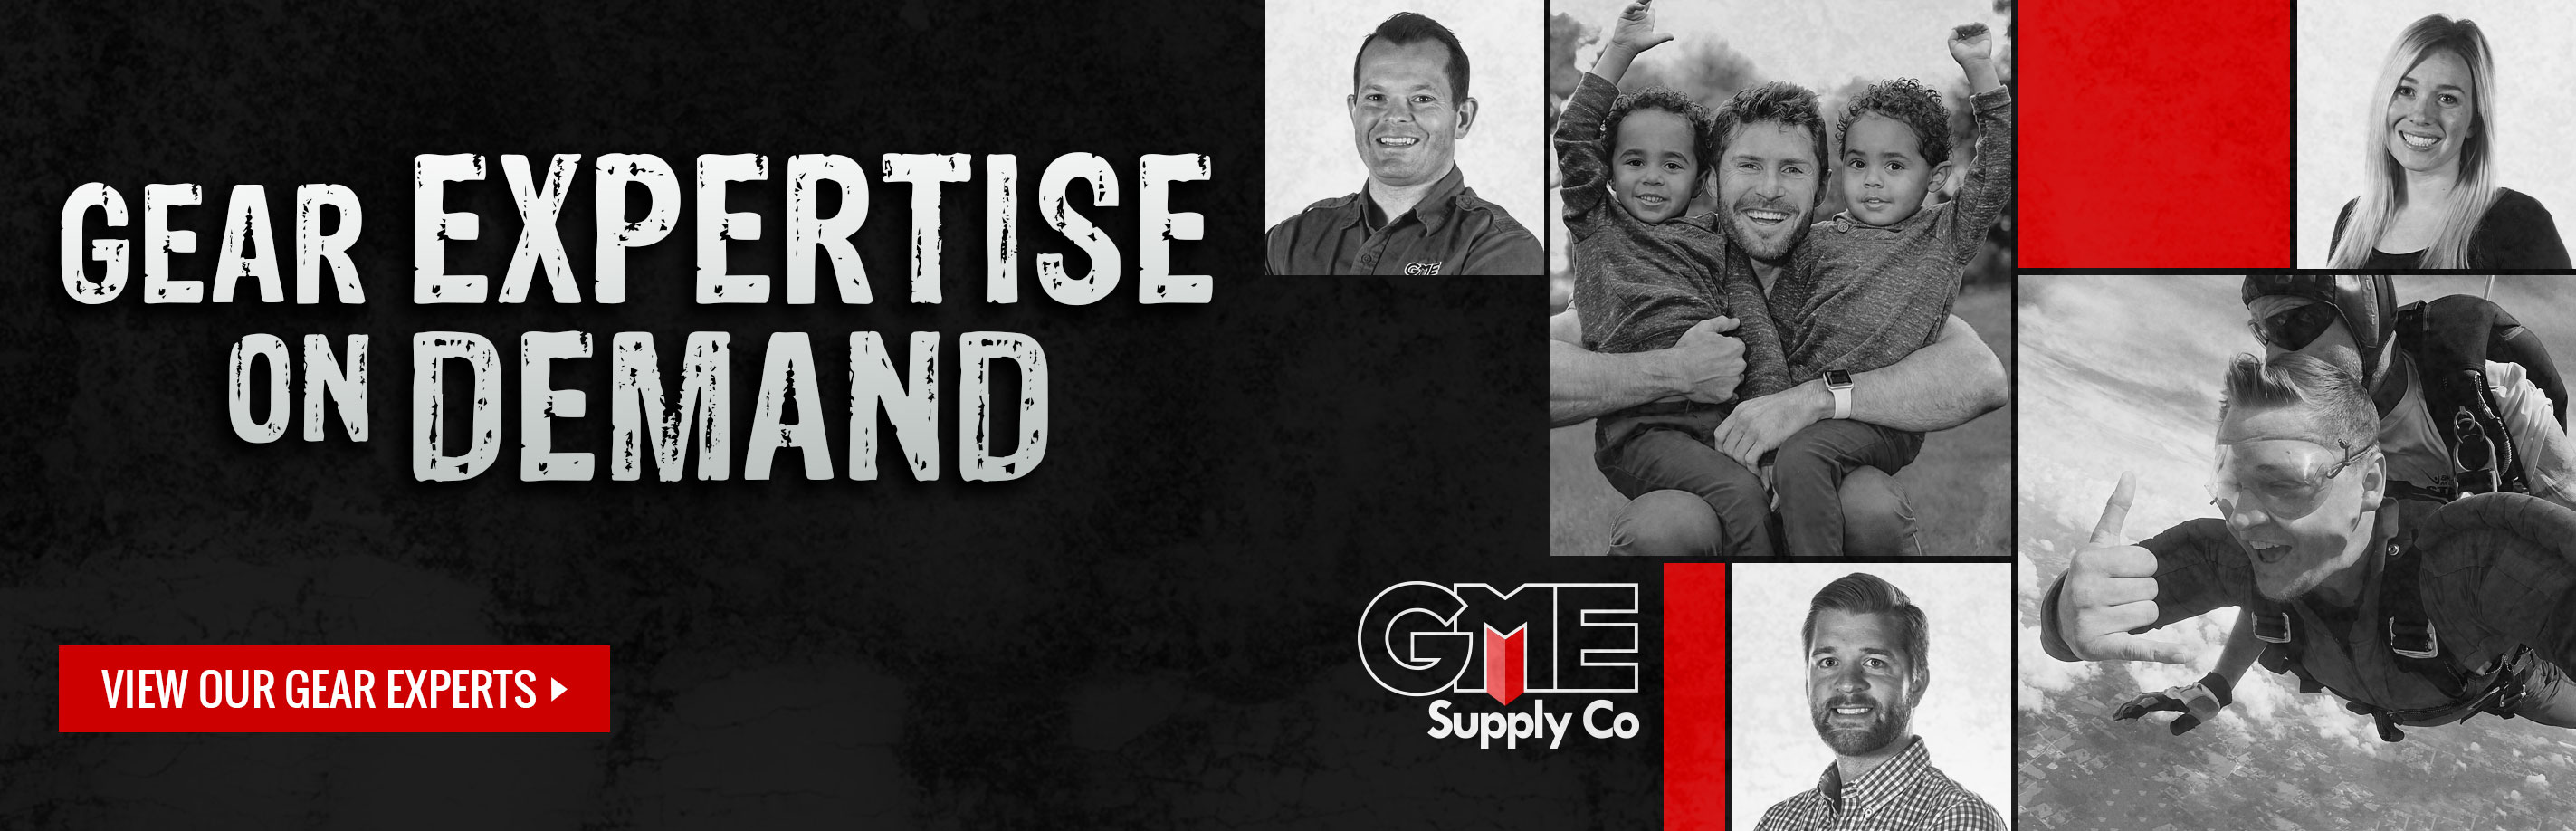 Gear Expertise on demand at GME Supply